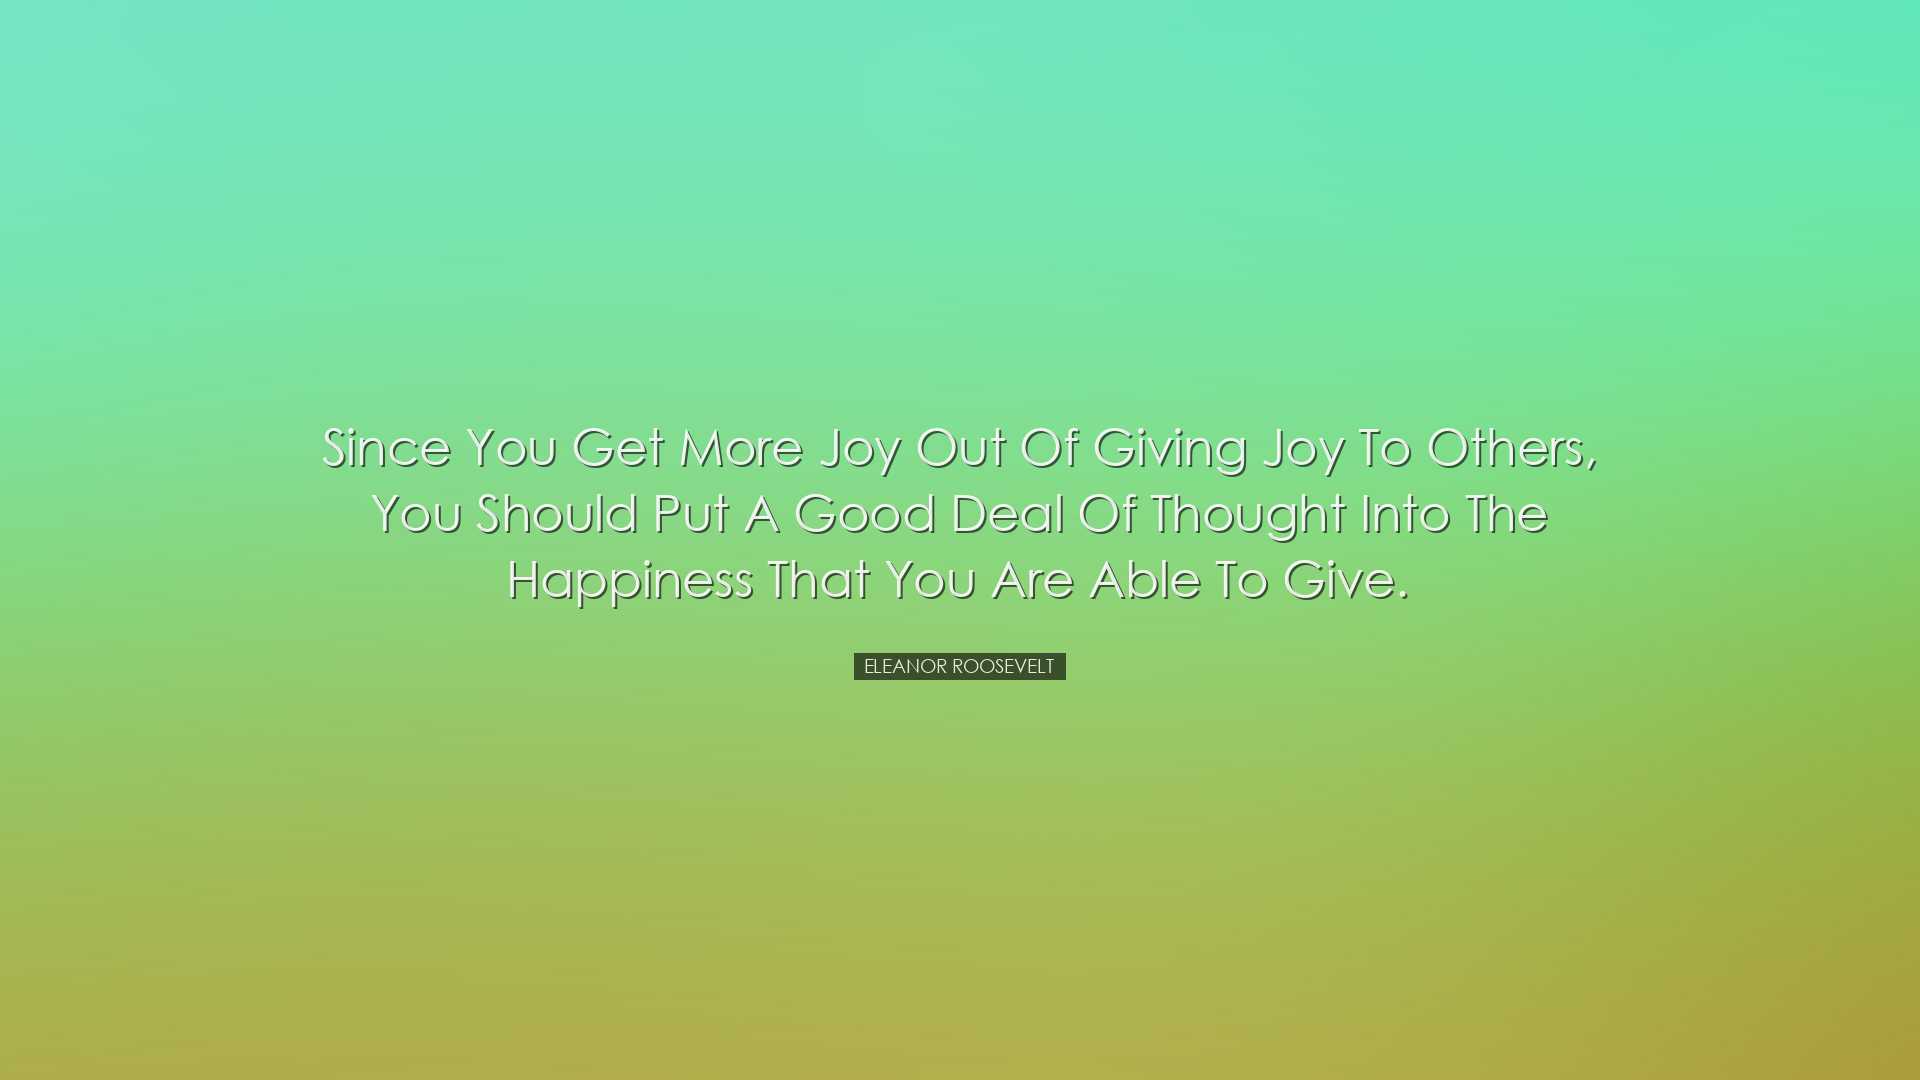 Since you get more joy out of giving joy to others, you should put